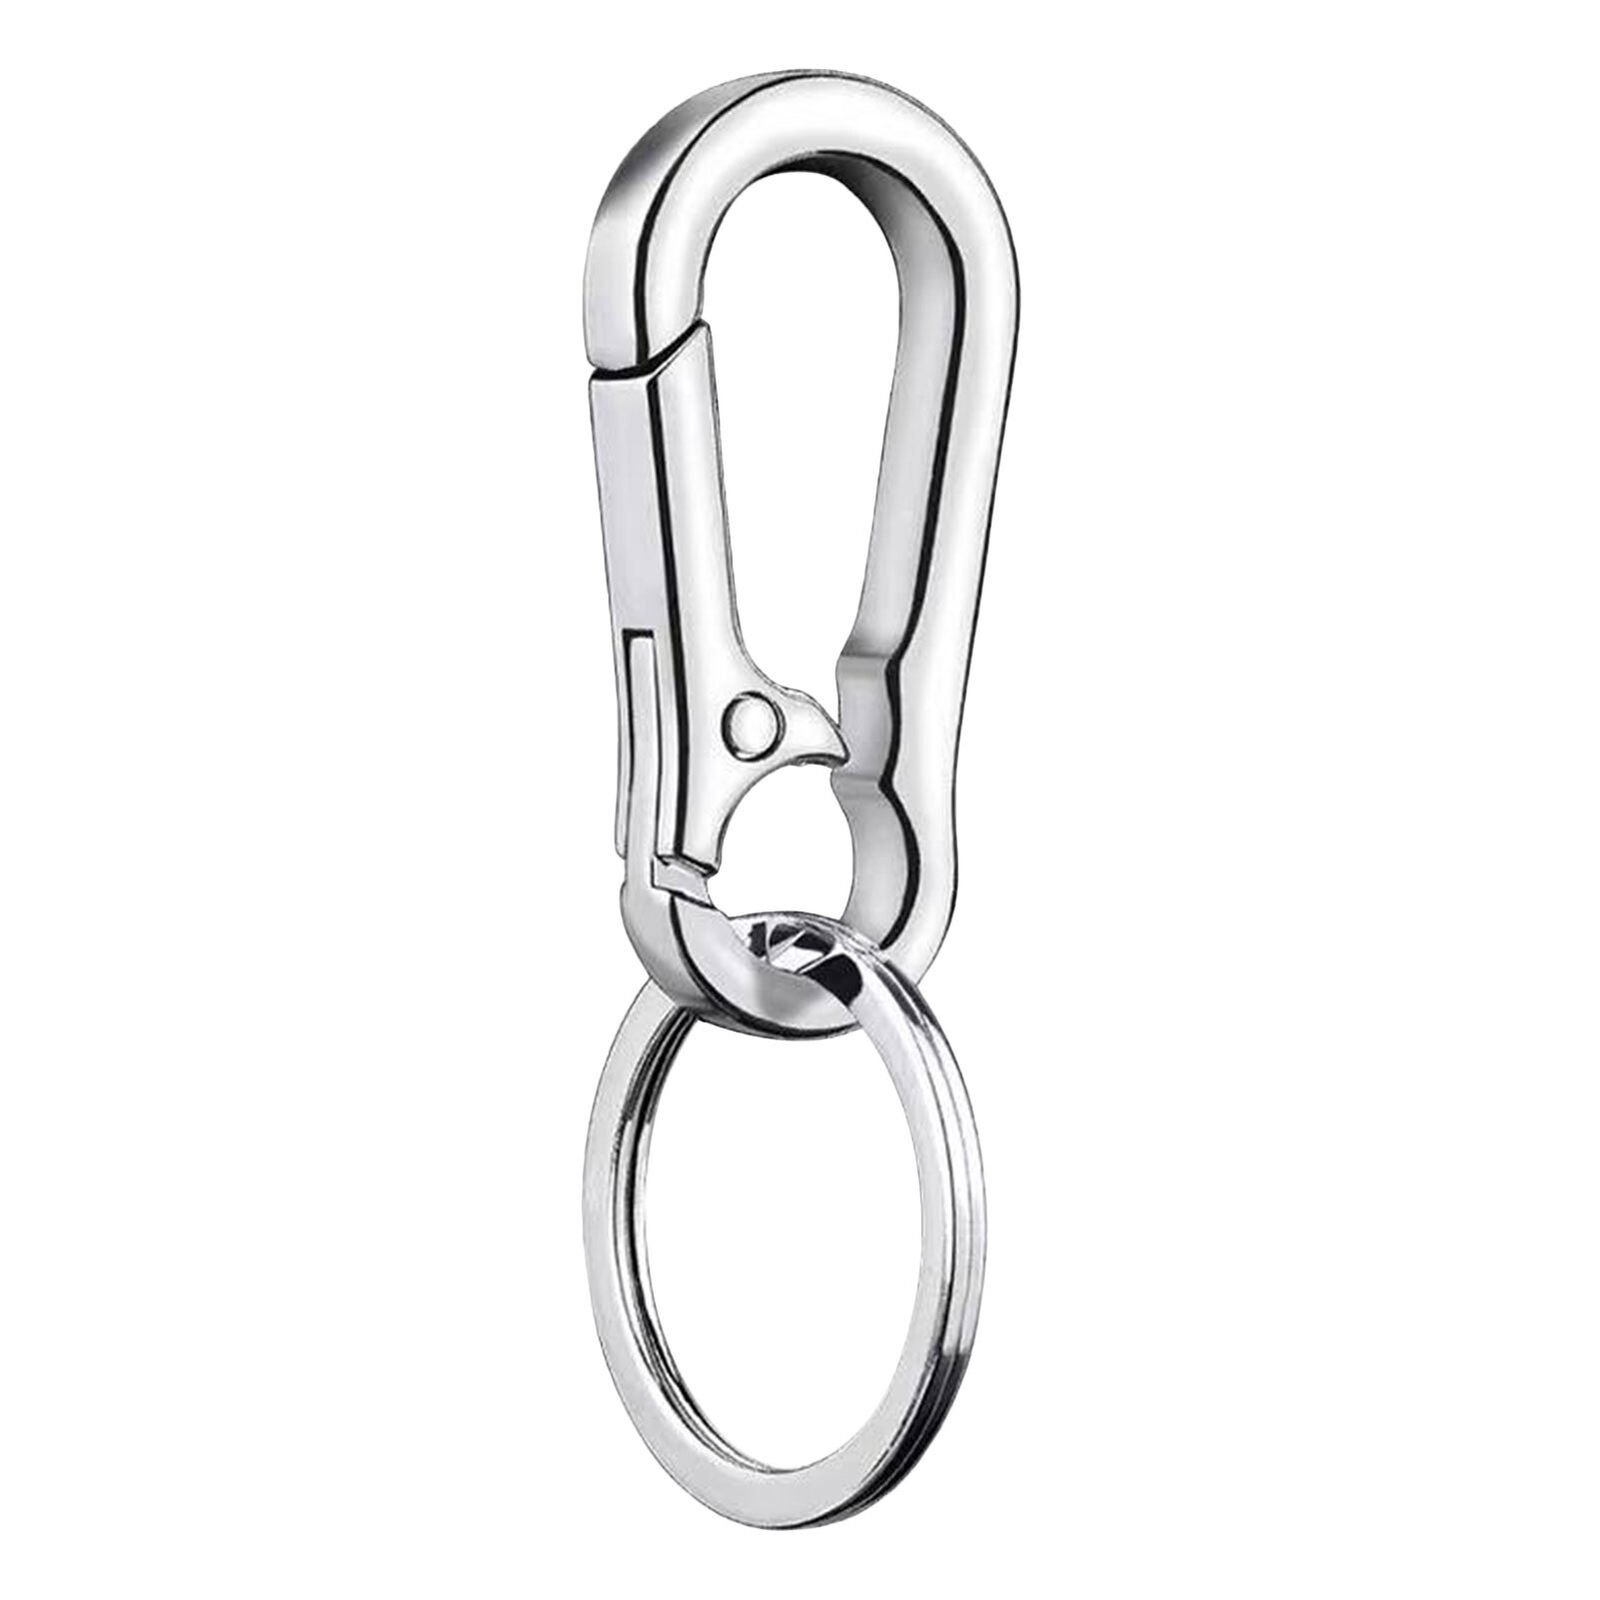 Mini Stainless Steel Carabiner Key Chain Clip Hook Buckle Keychain Key Ring